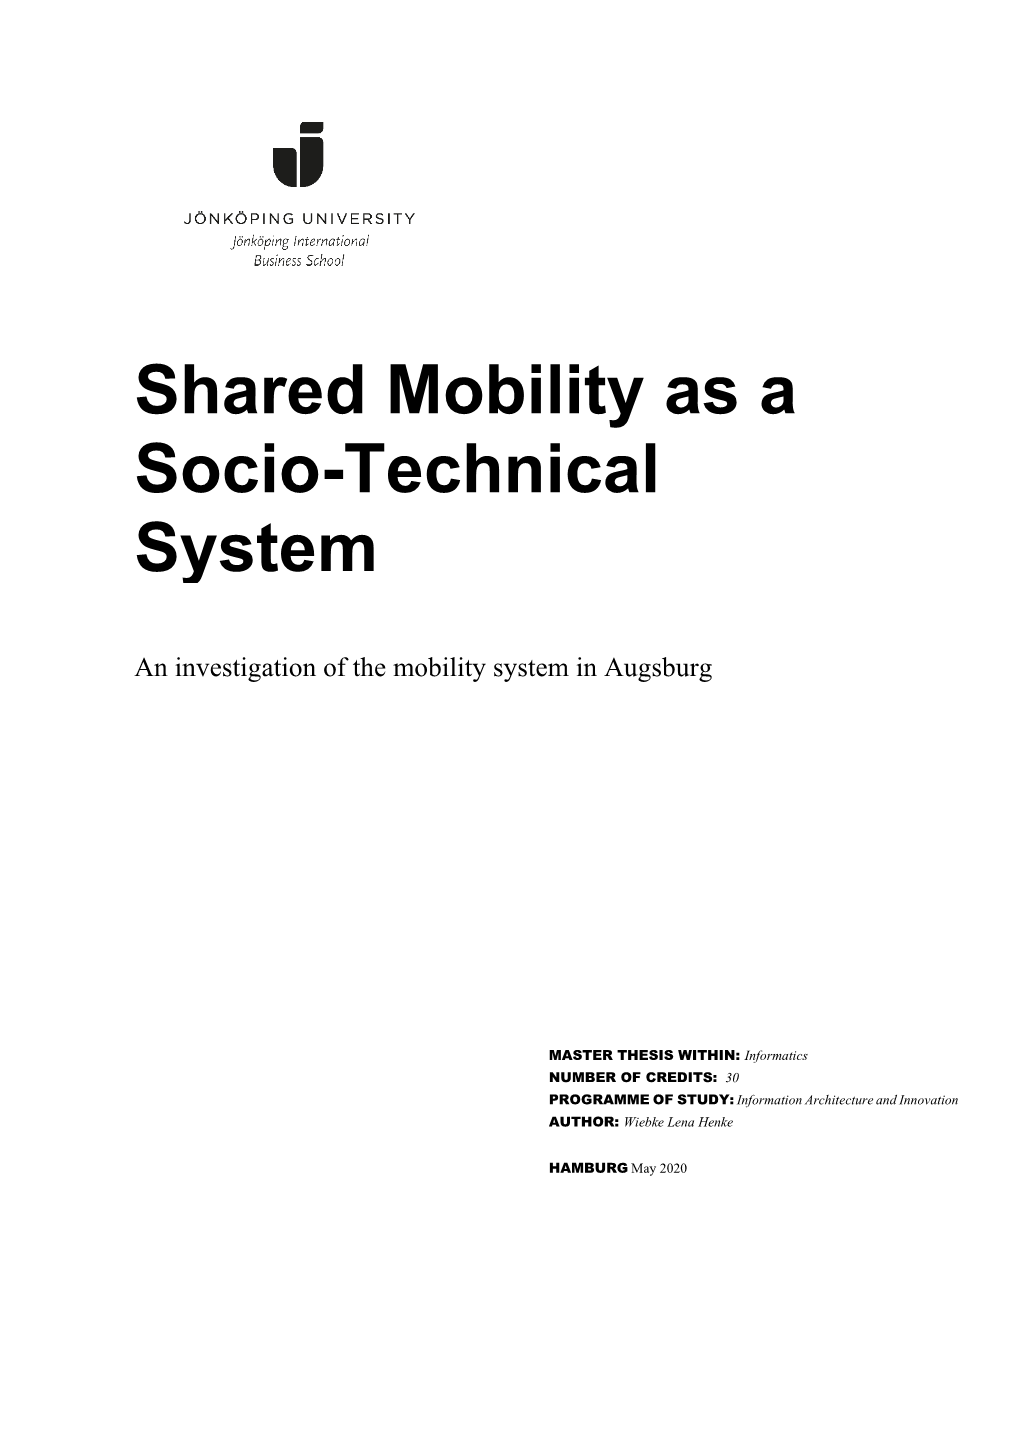 Shared Mobility As a Socio-Technical System